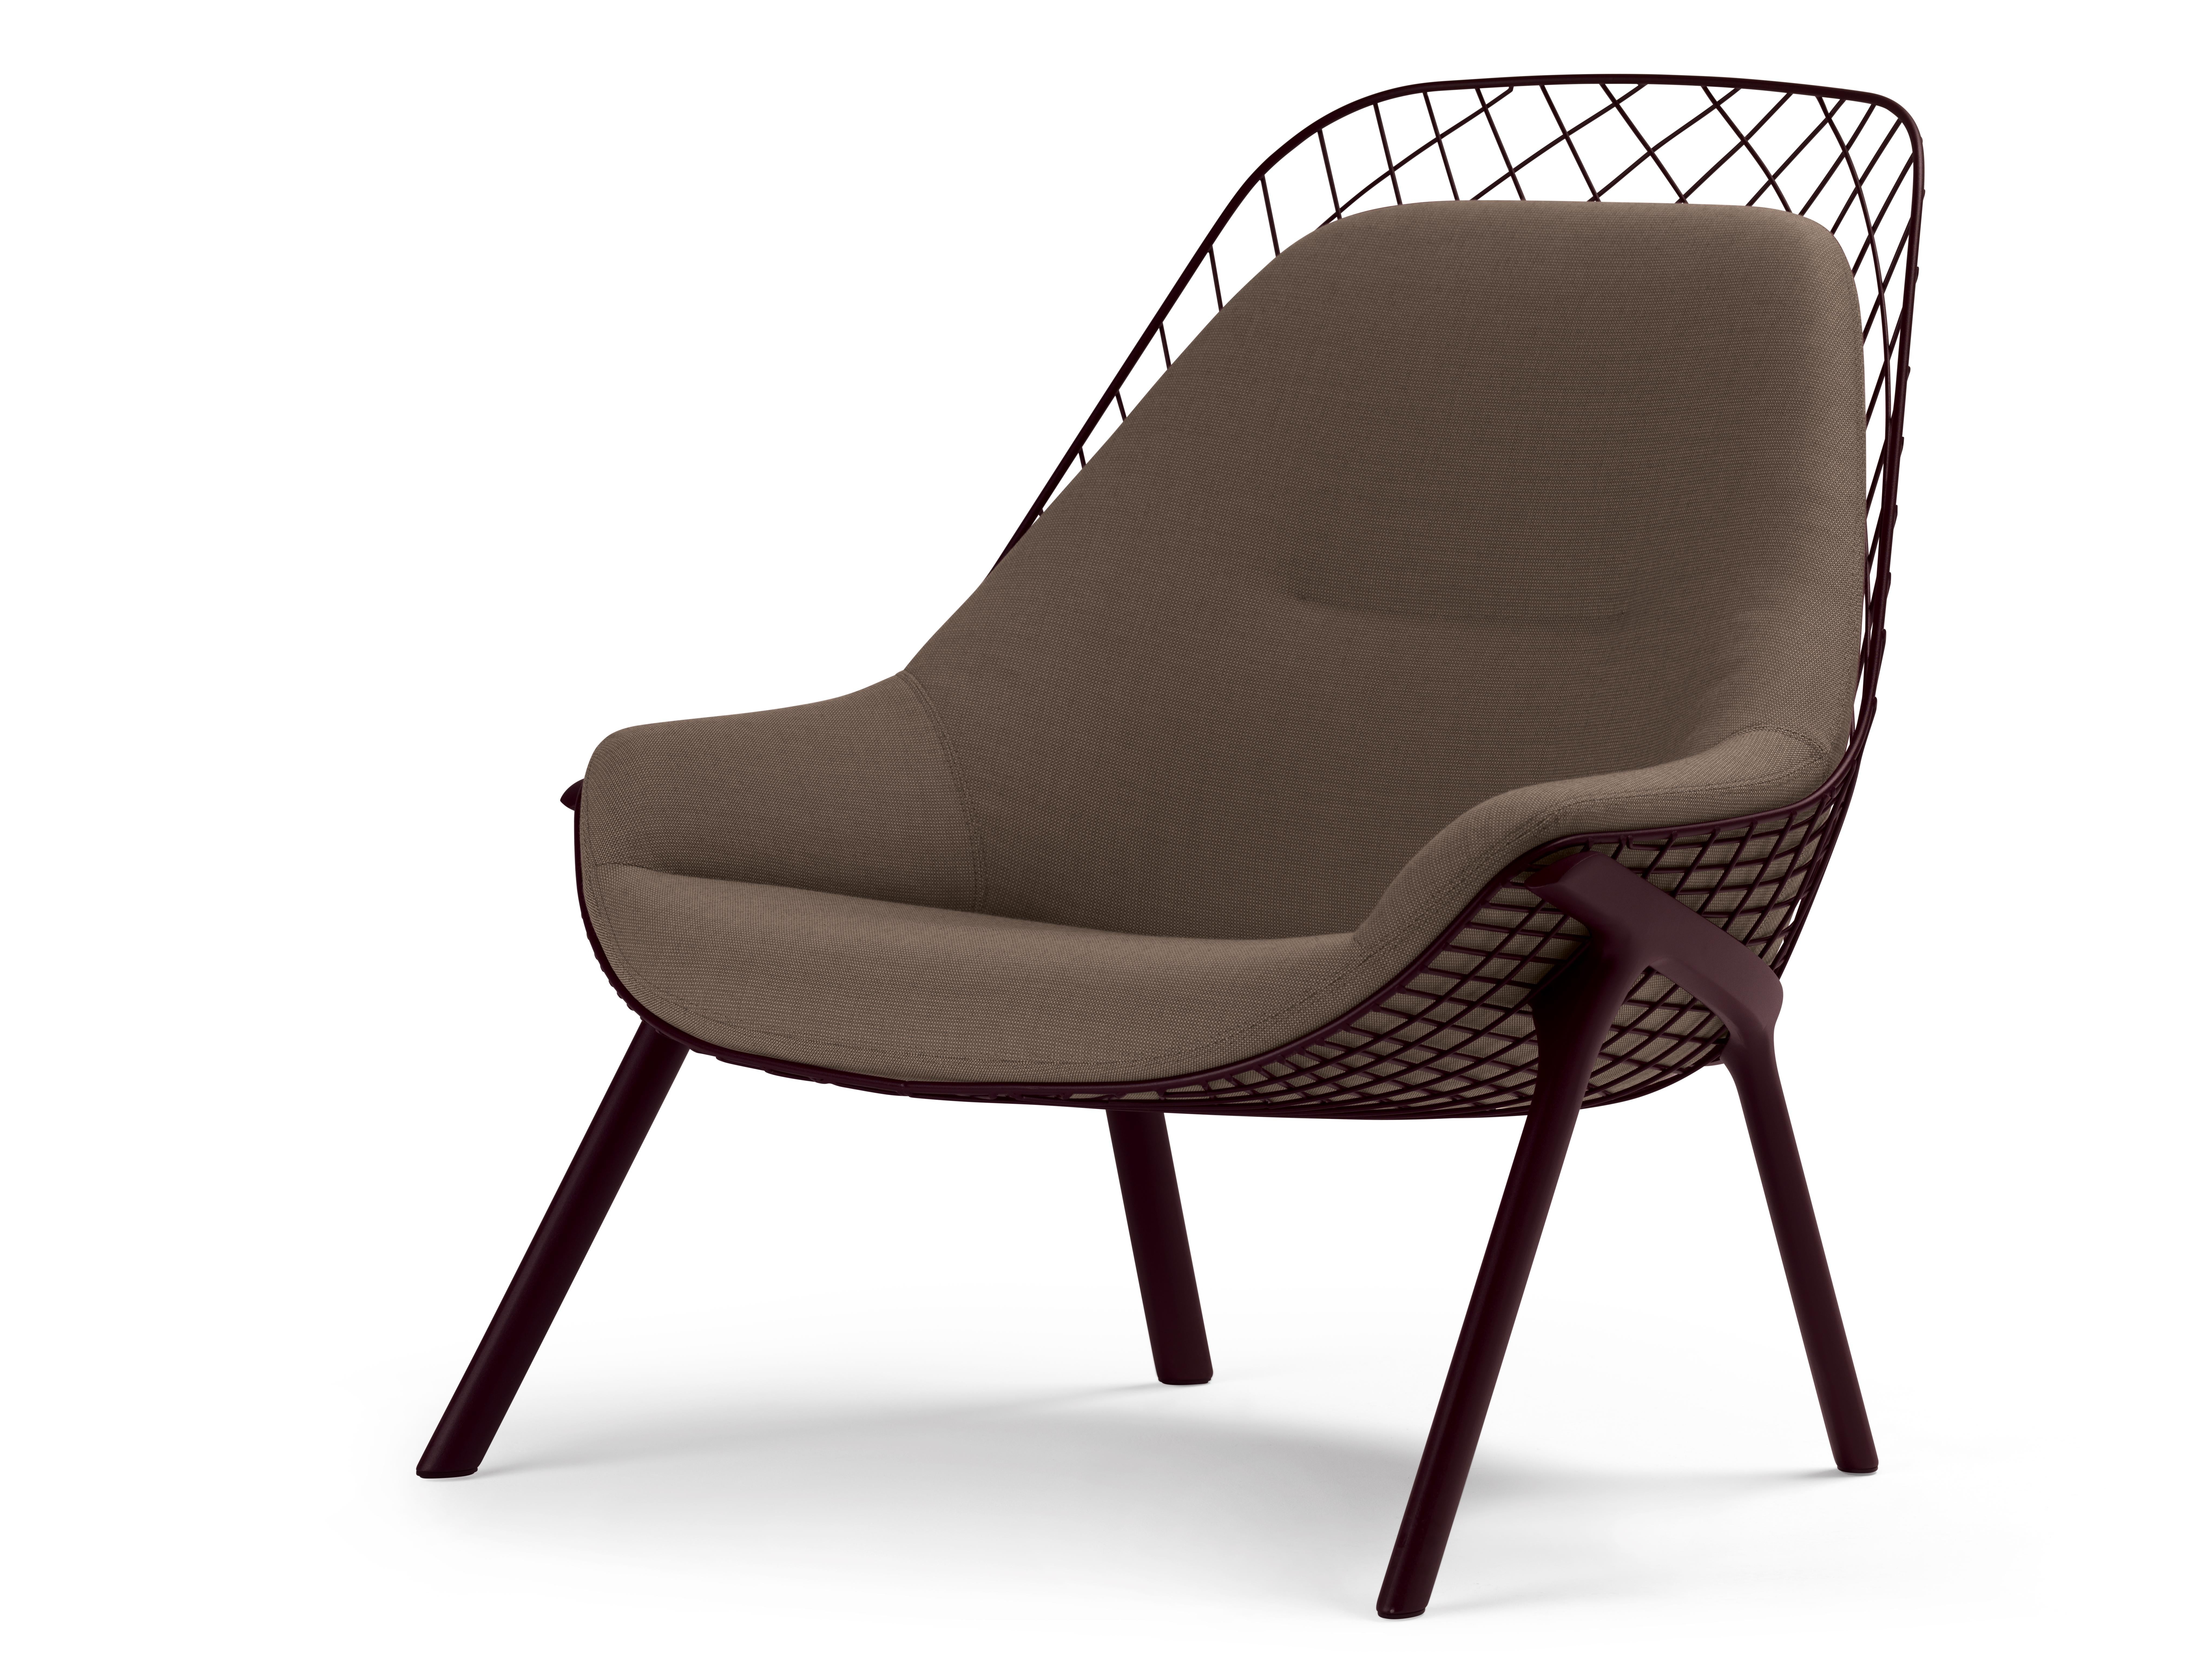 Alias 035 Gran Kobi Outdoor Armchair with Brown Pad and Lacquered Aluminum Frame by Patrick Norguet

Armchair with shell in lacquered steel; support belt and legs in lacquered aluminium. Cushion in expanded polyuretane upholstered in fabric or